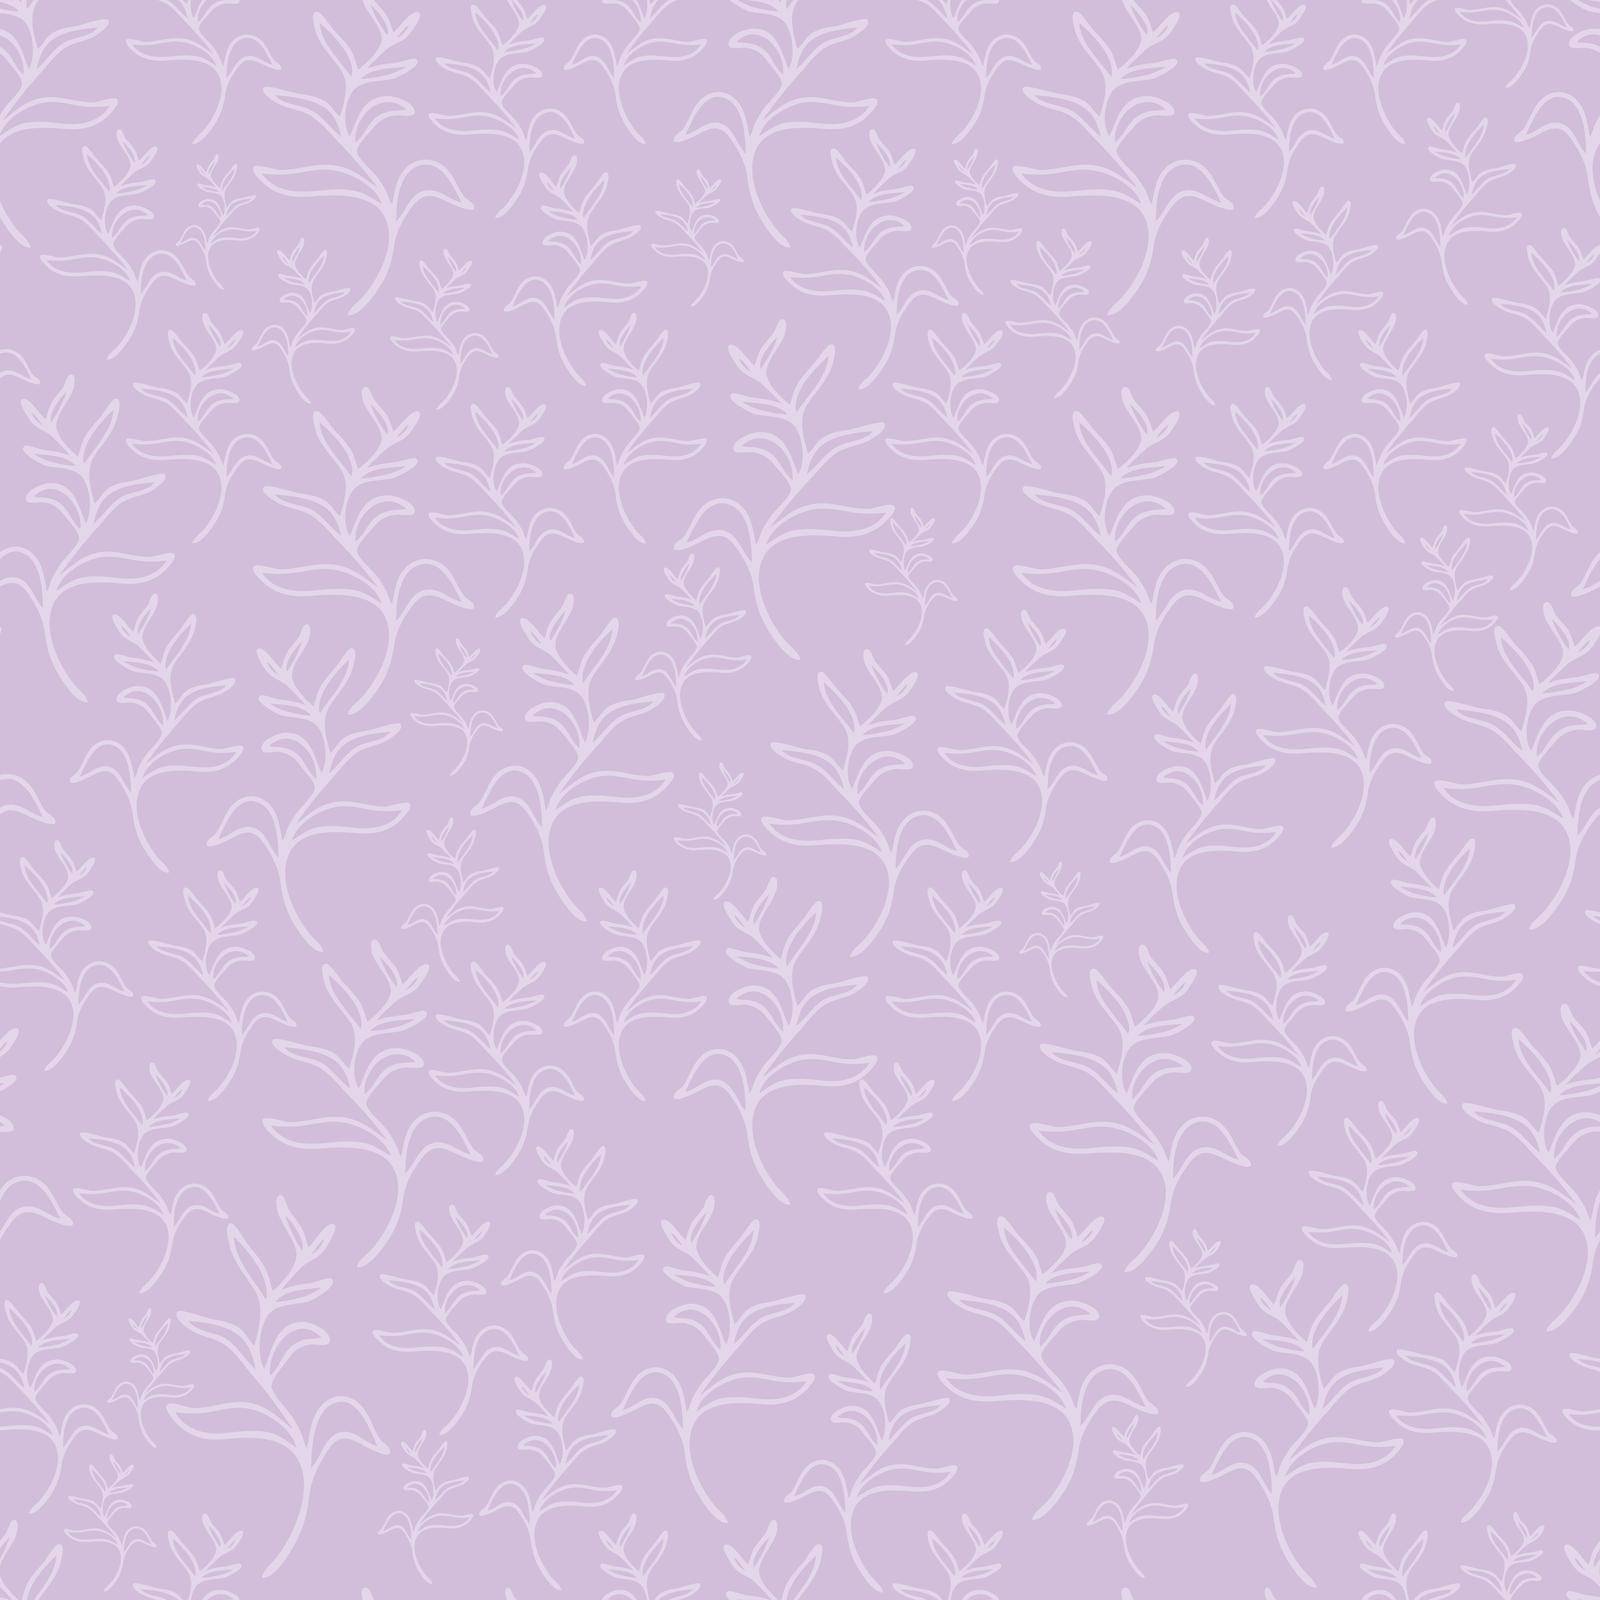 pastel lavender leaves seamless patterns set. botanical floral hand drawn lineart flower elements. packaging wrapping fabric textile design by MariaTem